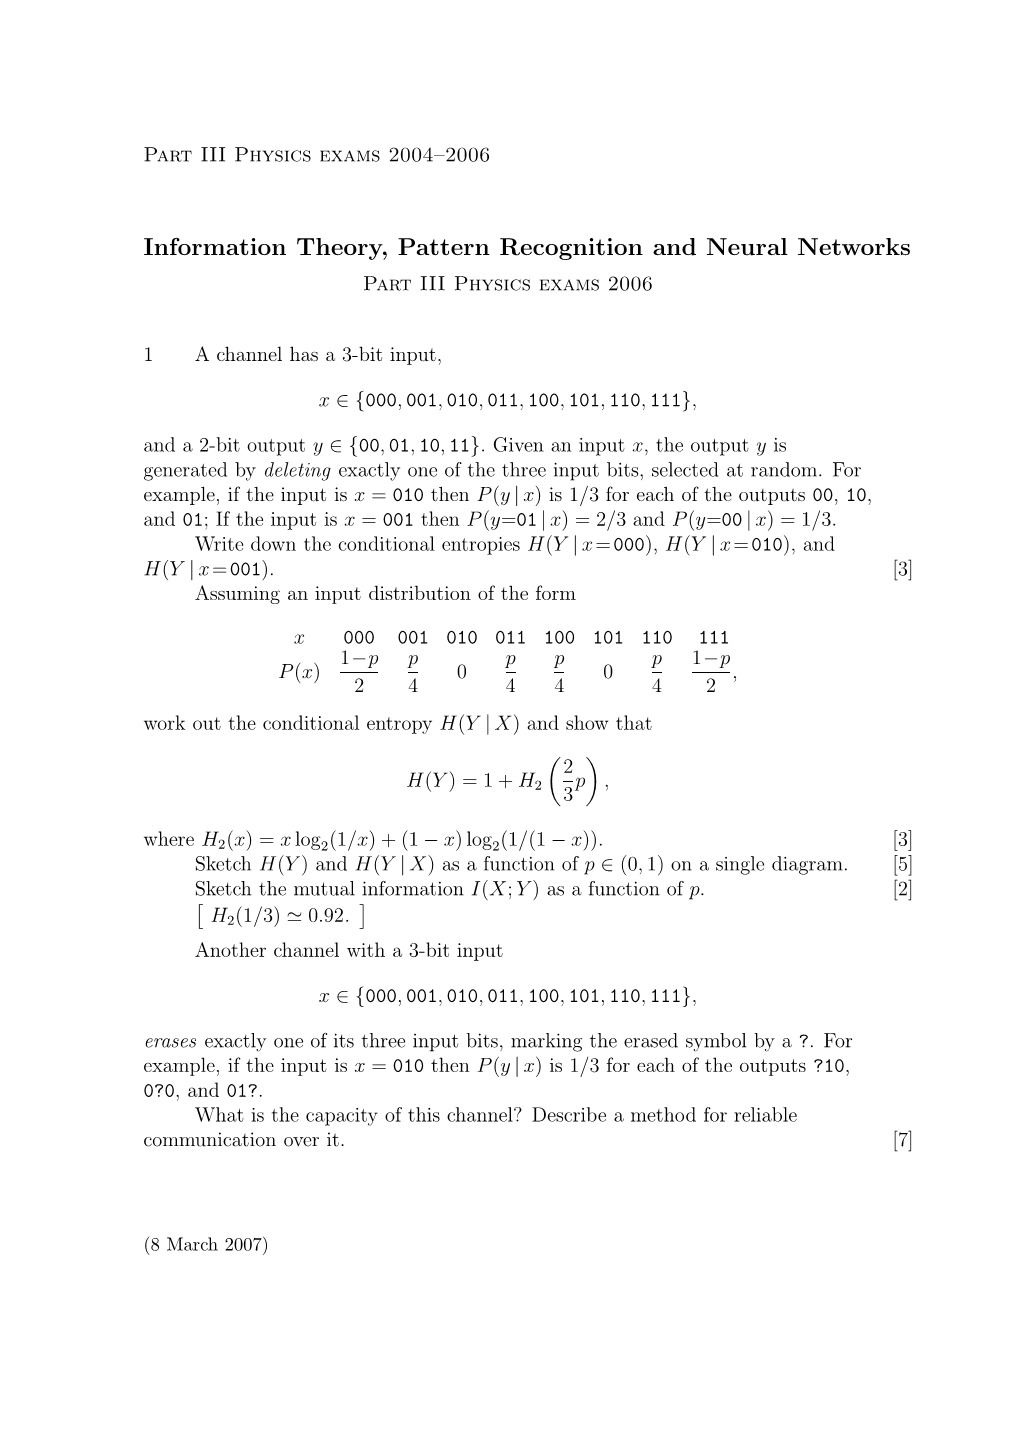 Information Theory, Pattern Recognition and Neural Networks Part III Physics Exams 2006